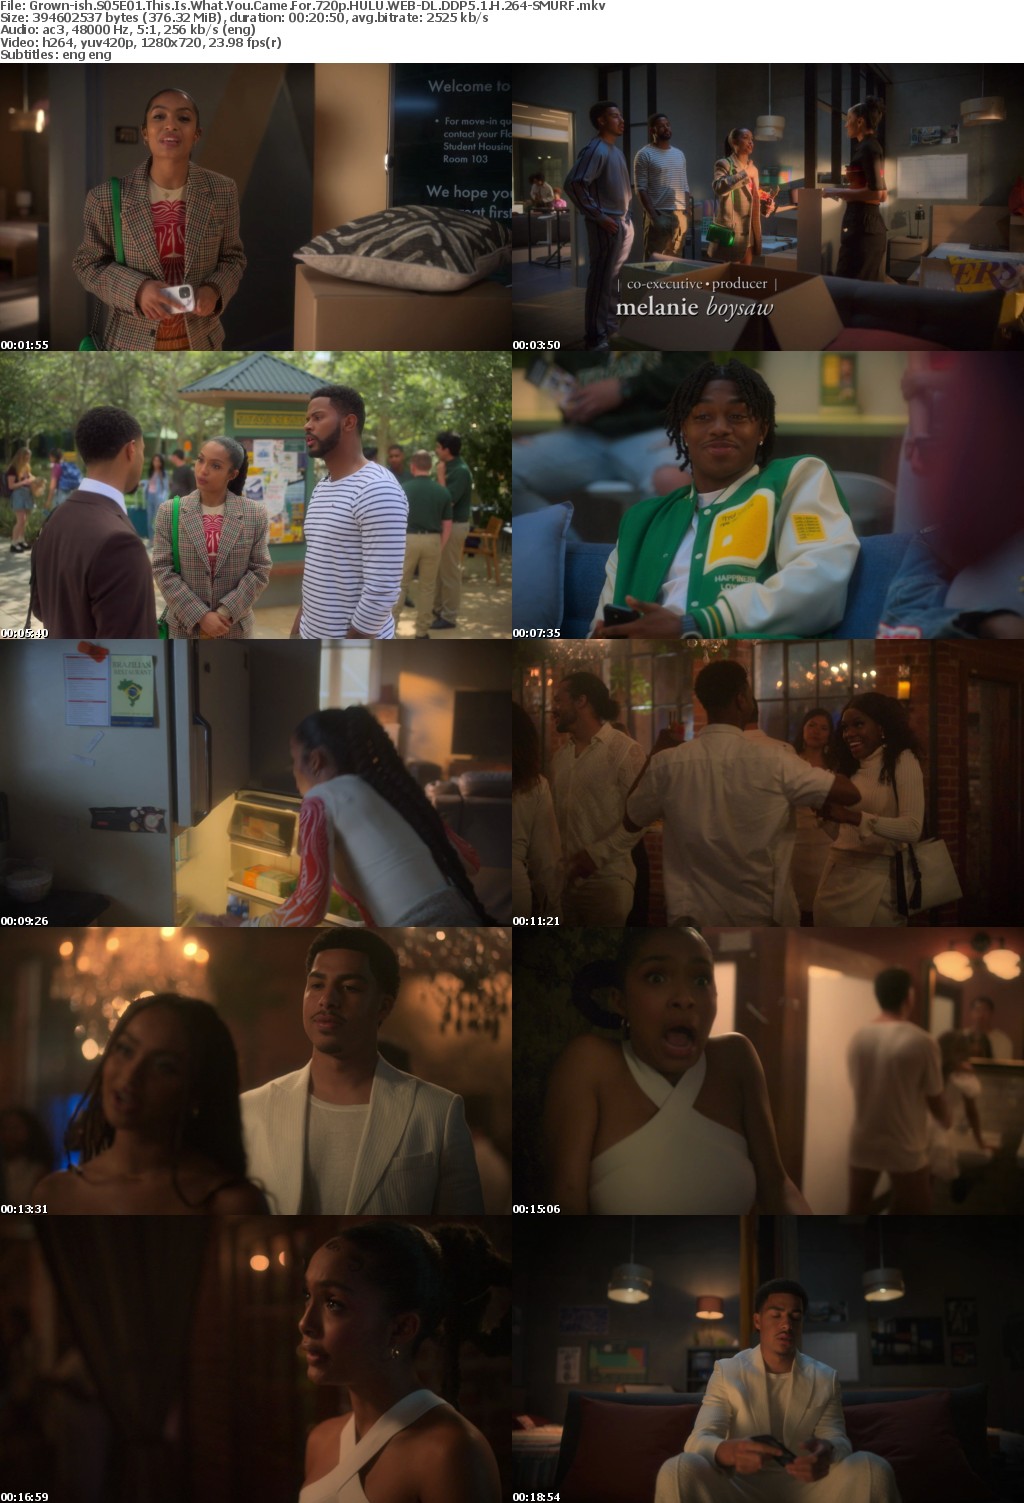 Grown-ish S05E01 This Is What You Came For 720p HULU WEBRip DDP5 1 x264-SMURF